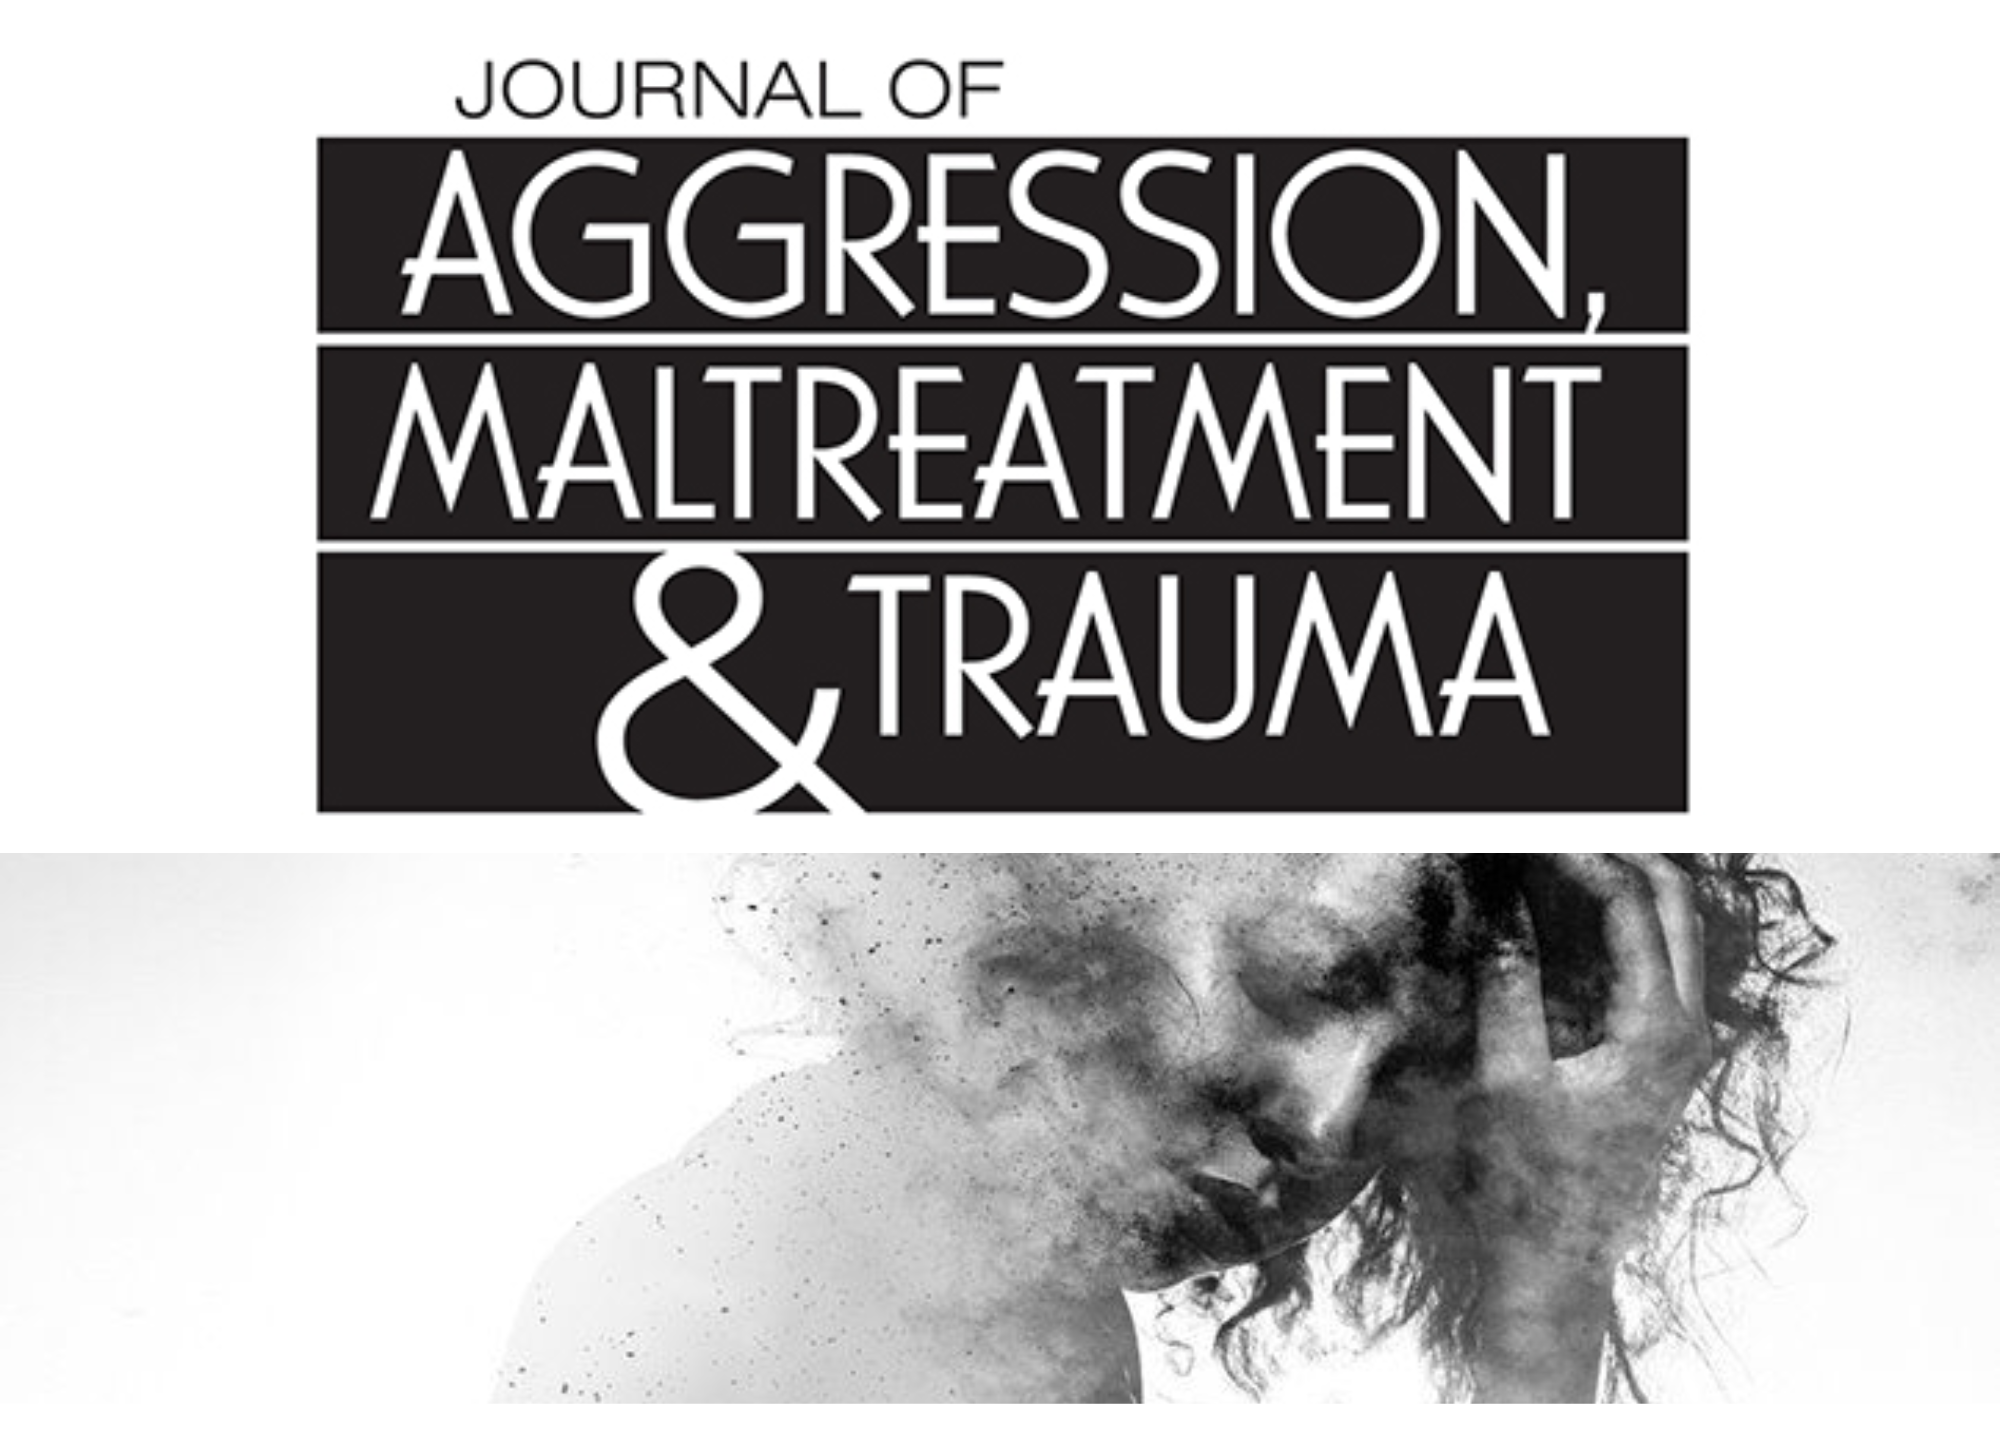 Journal Of Aggression Maltreatment & Trauma - Most Read Articles